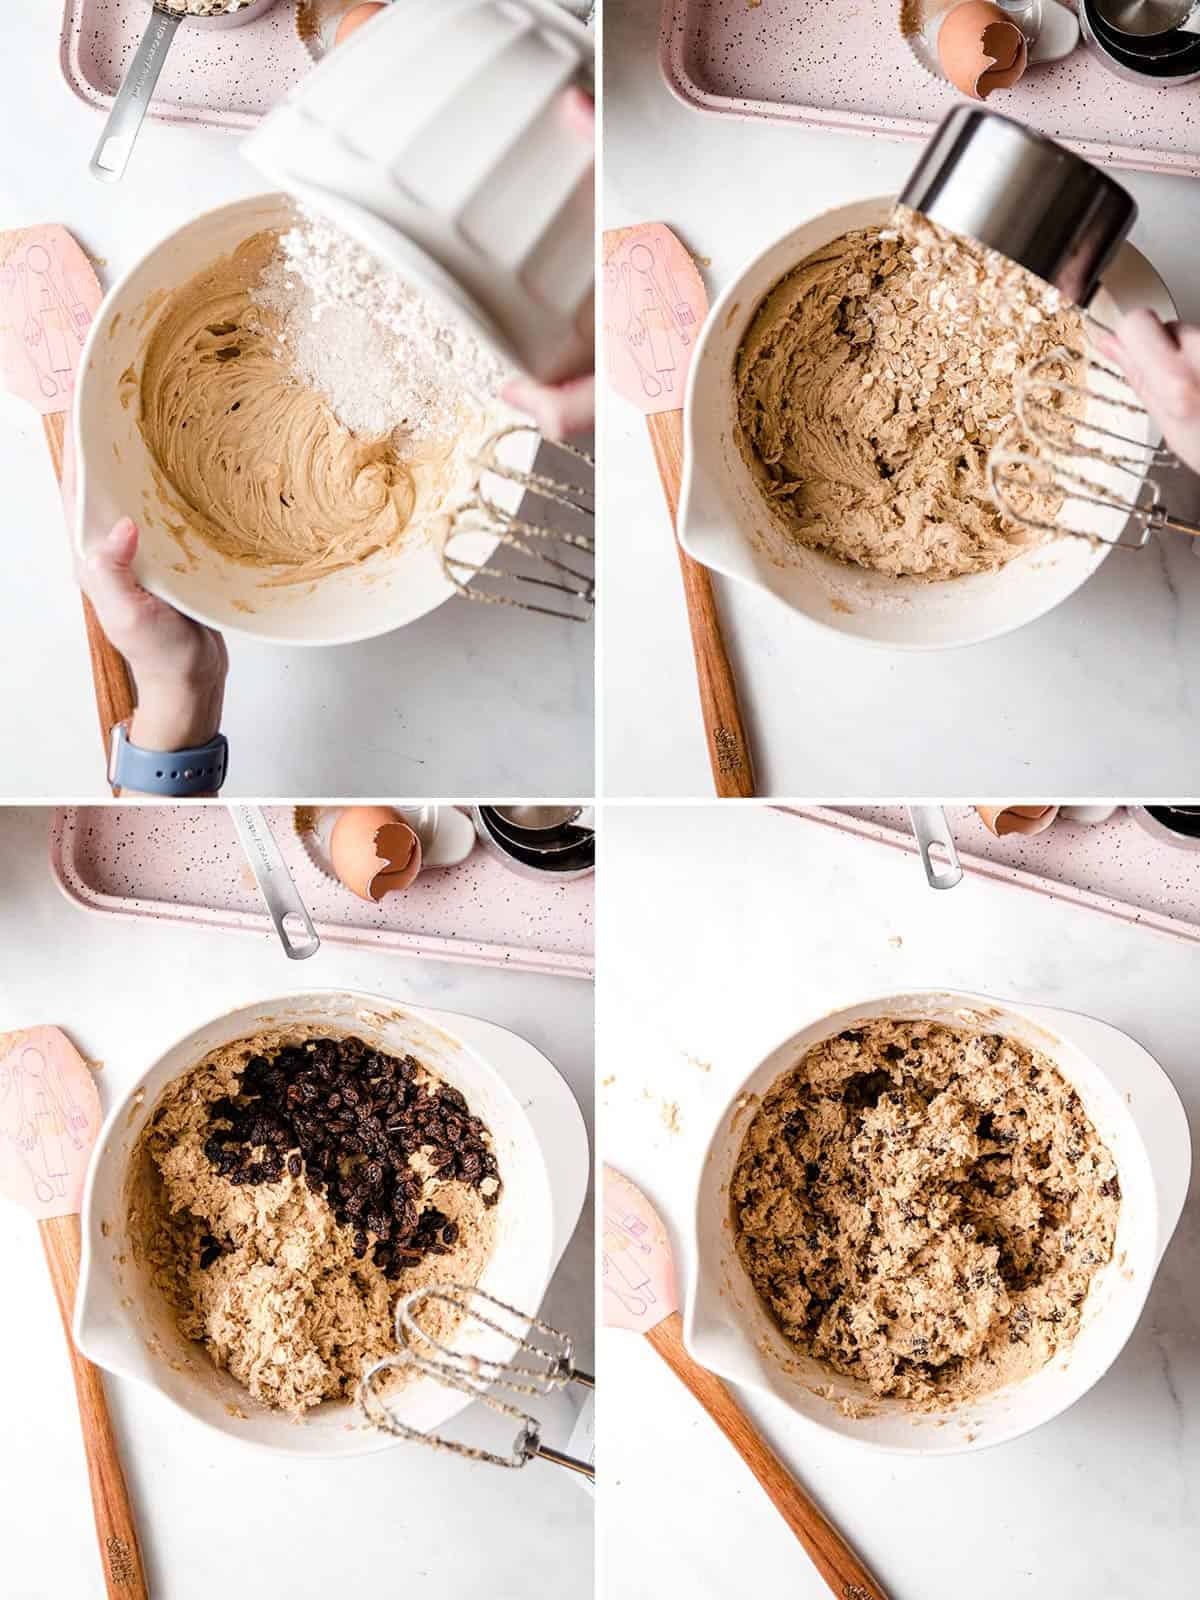 Images showing the mixing process to  make the cookies. First the creamed mixture and adding flour, second adding in the oats, third adding in the raisins, final the mixed dough.